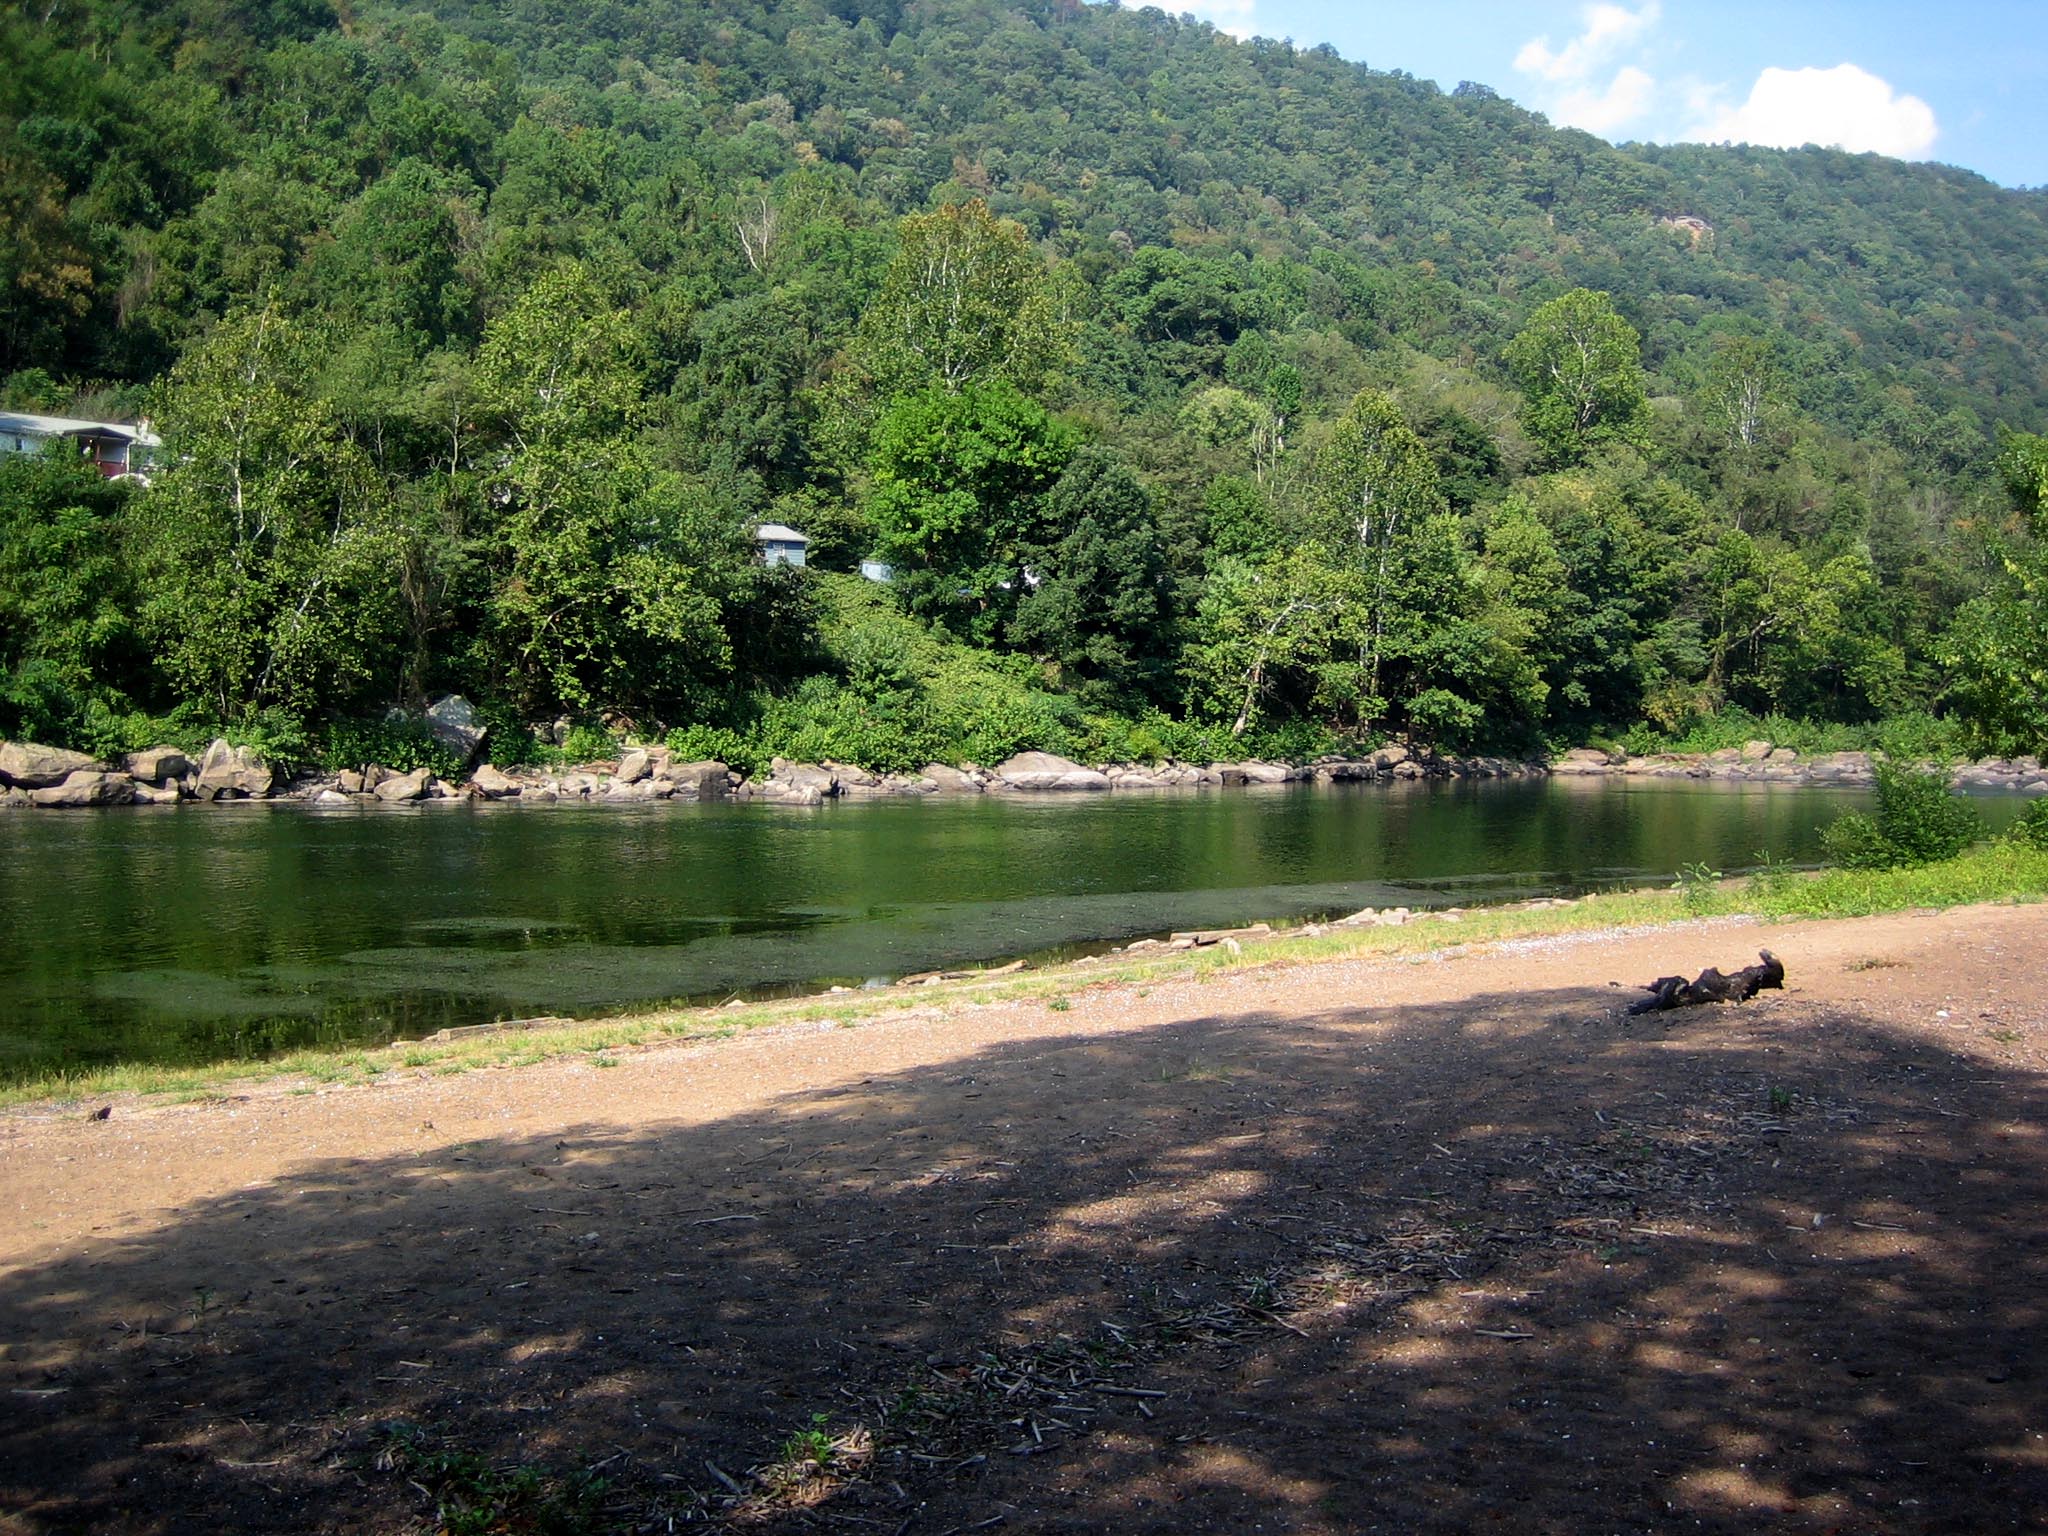 A sandy beach at a clear fast flowing river next to a green tree covered bank